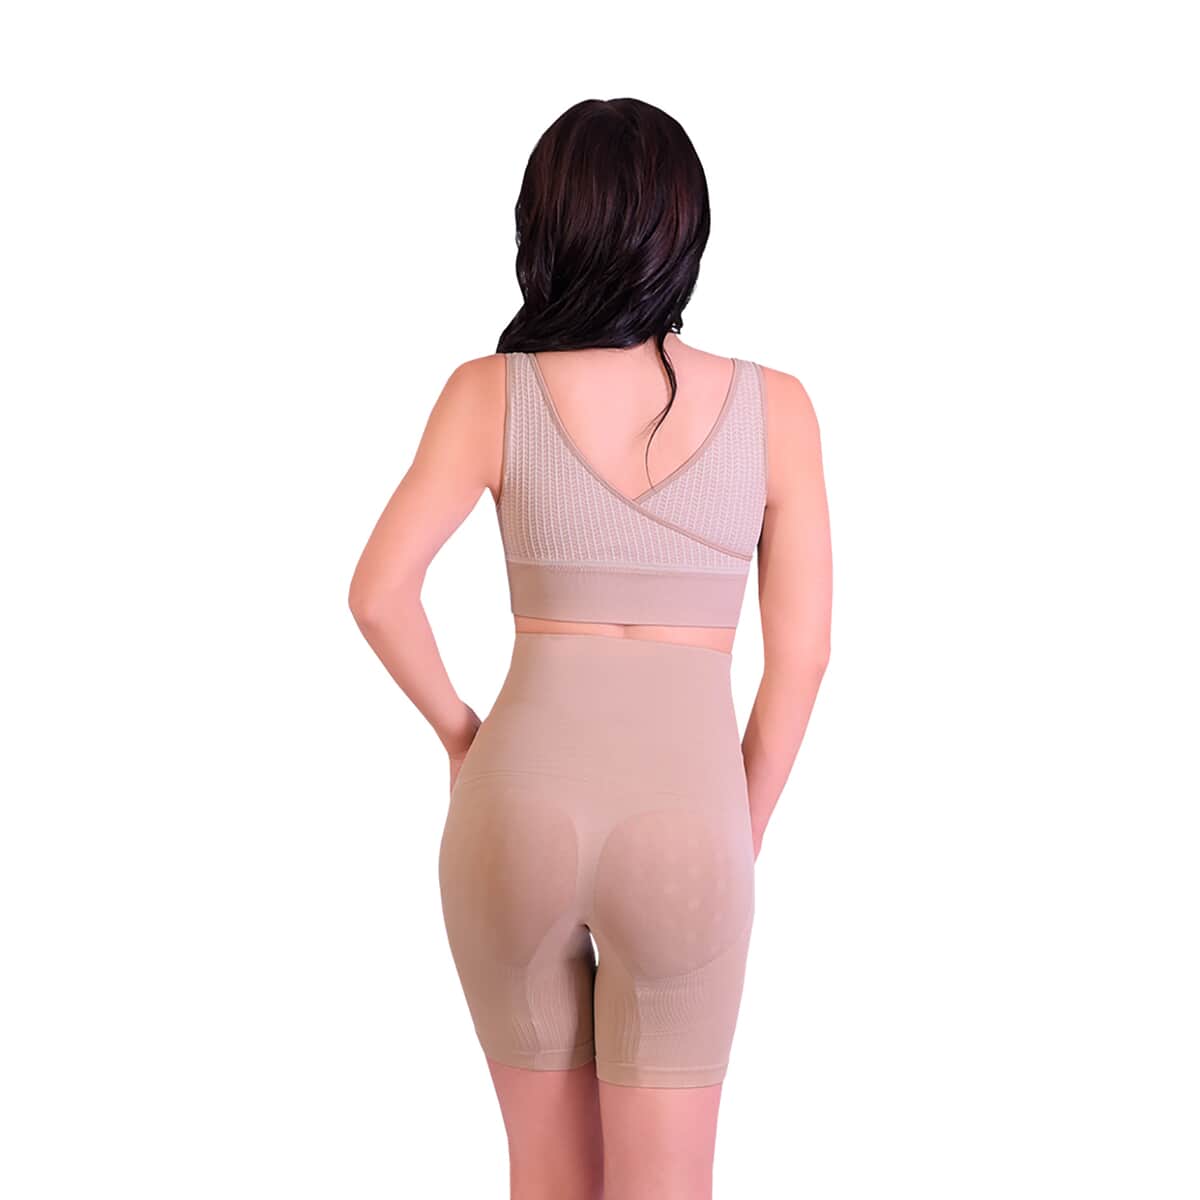 SANKOM Patent Mid-Thigh Shaper Shorts with Cooling Fibers - L/XL , Beige image number 6